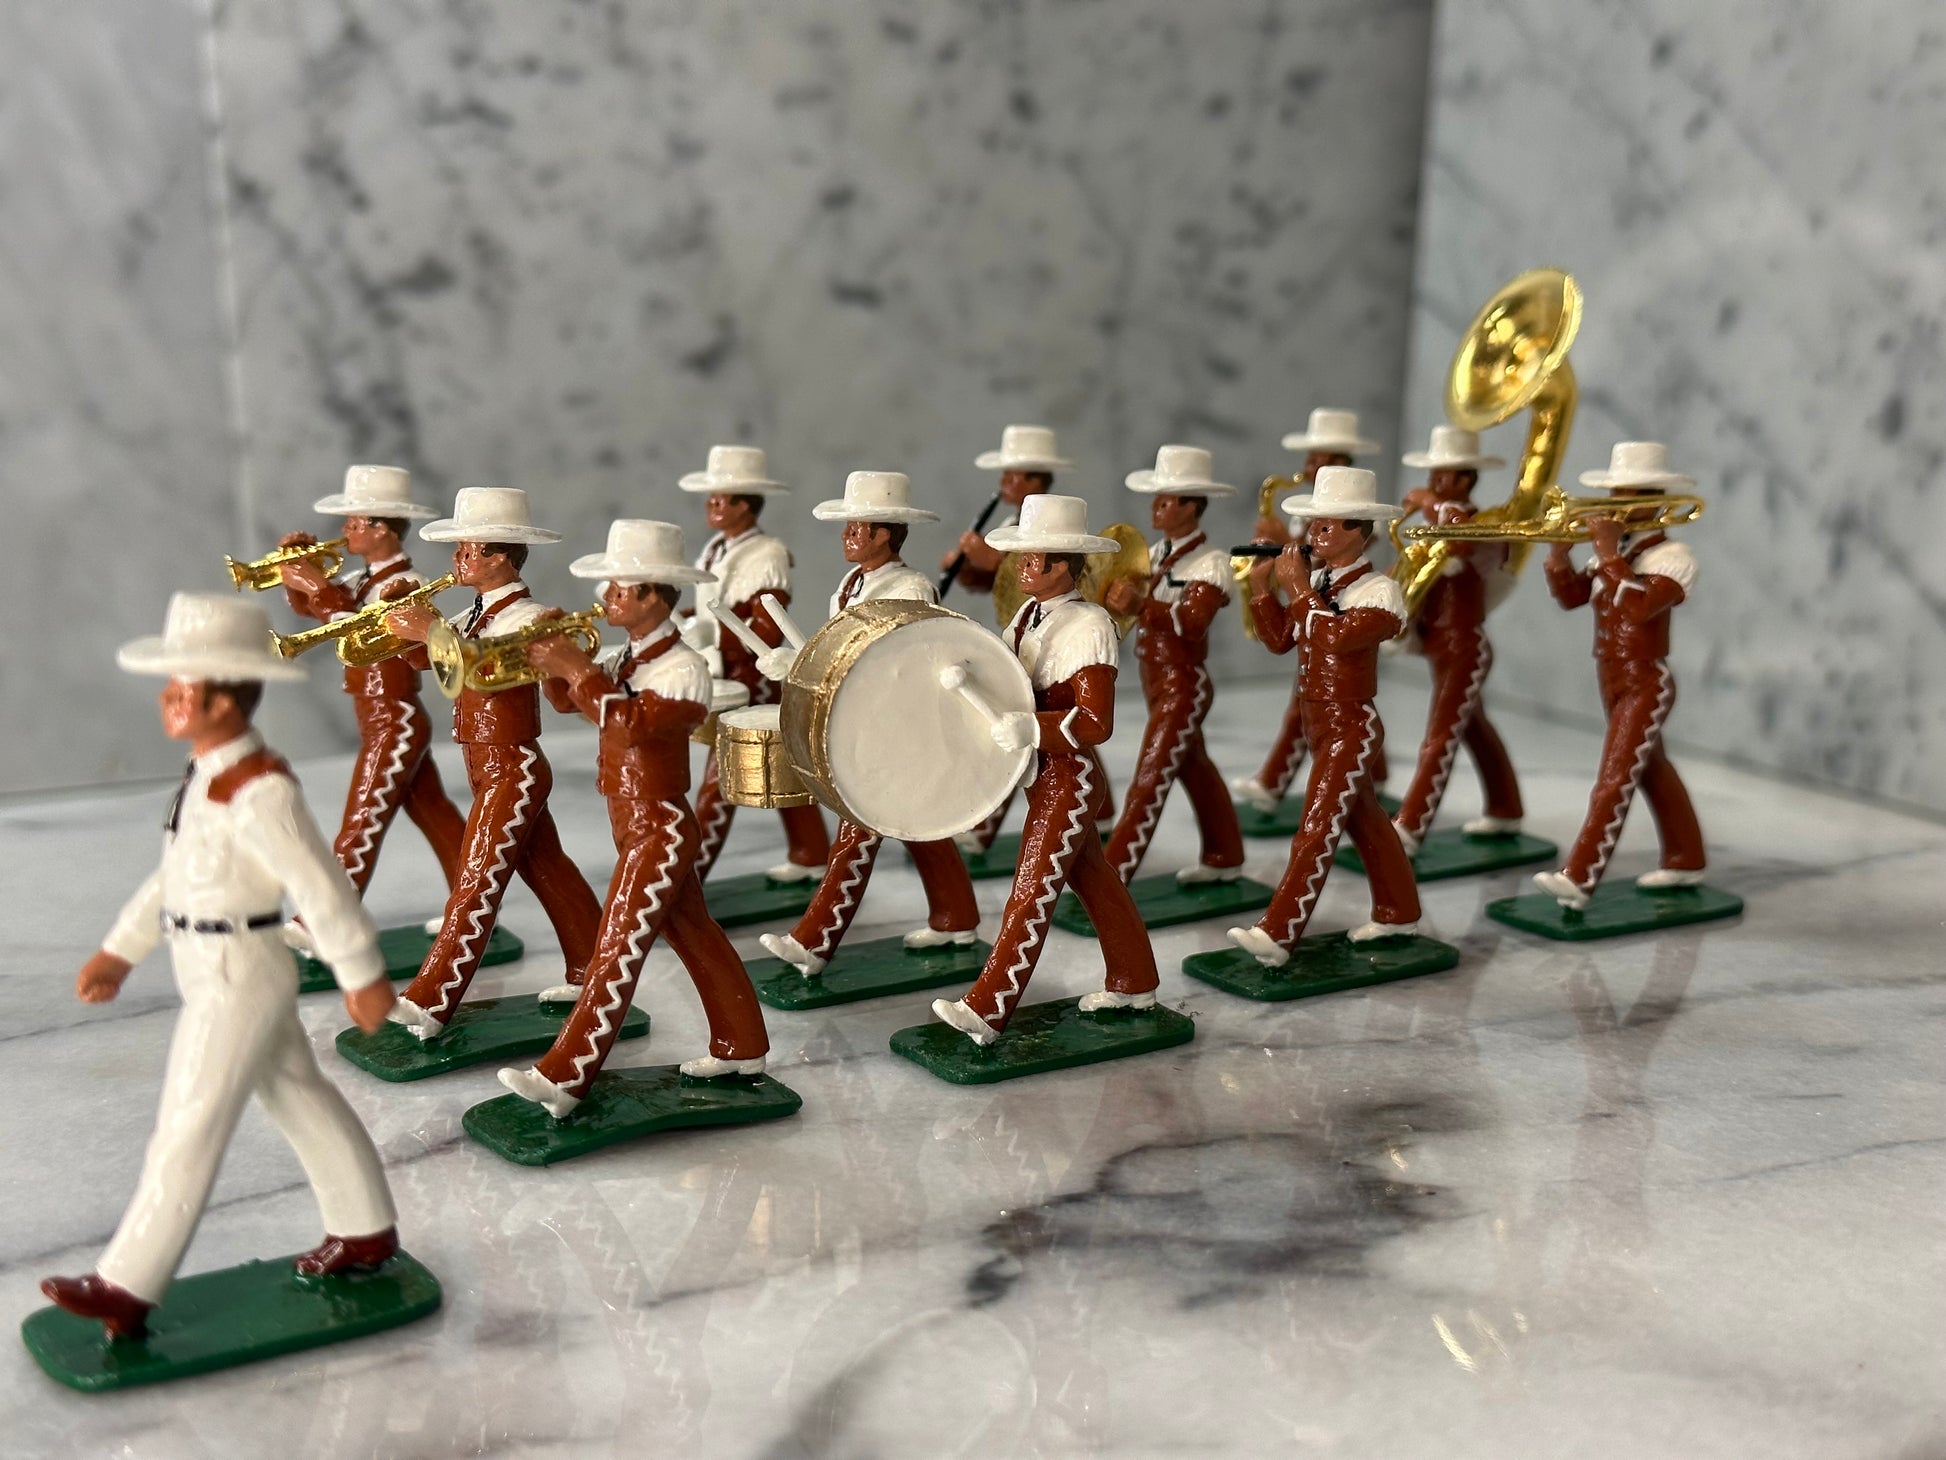 Collectible toy soldier army men University of Texas marching band side view.